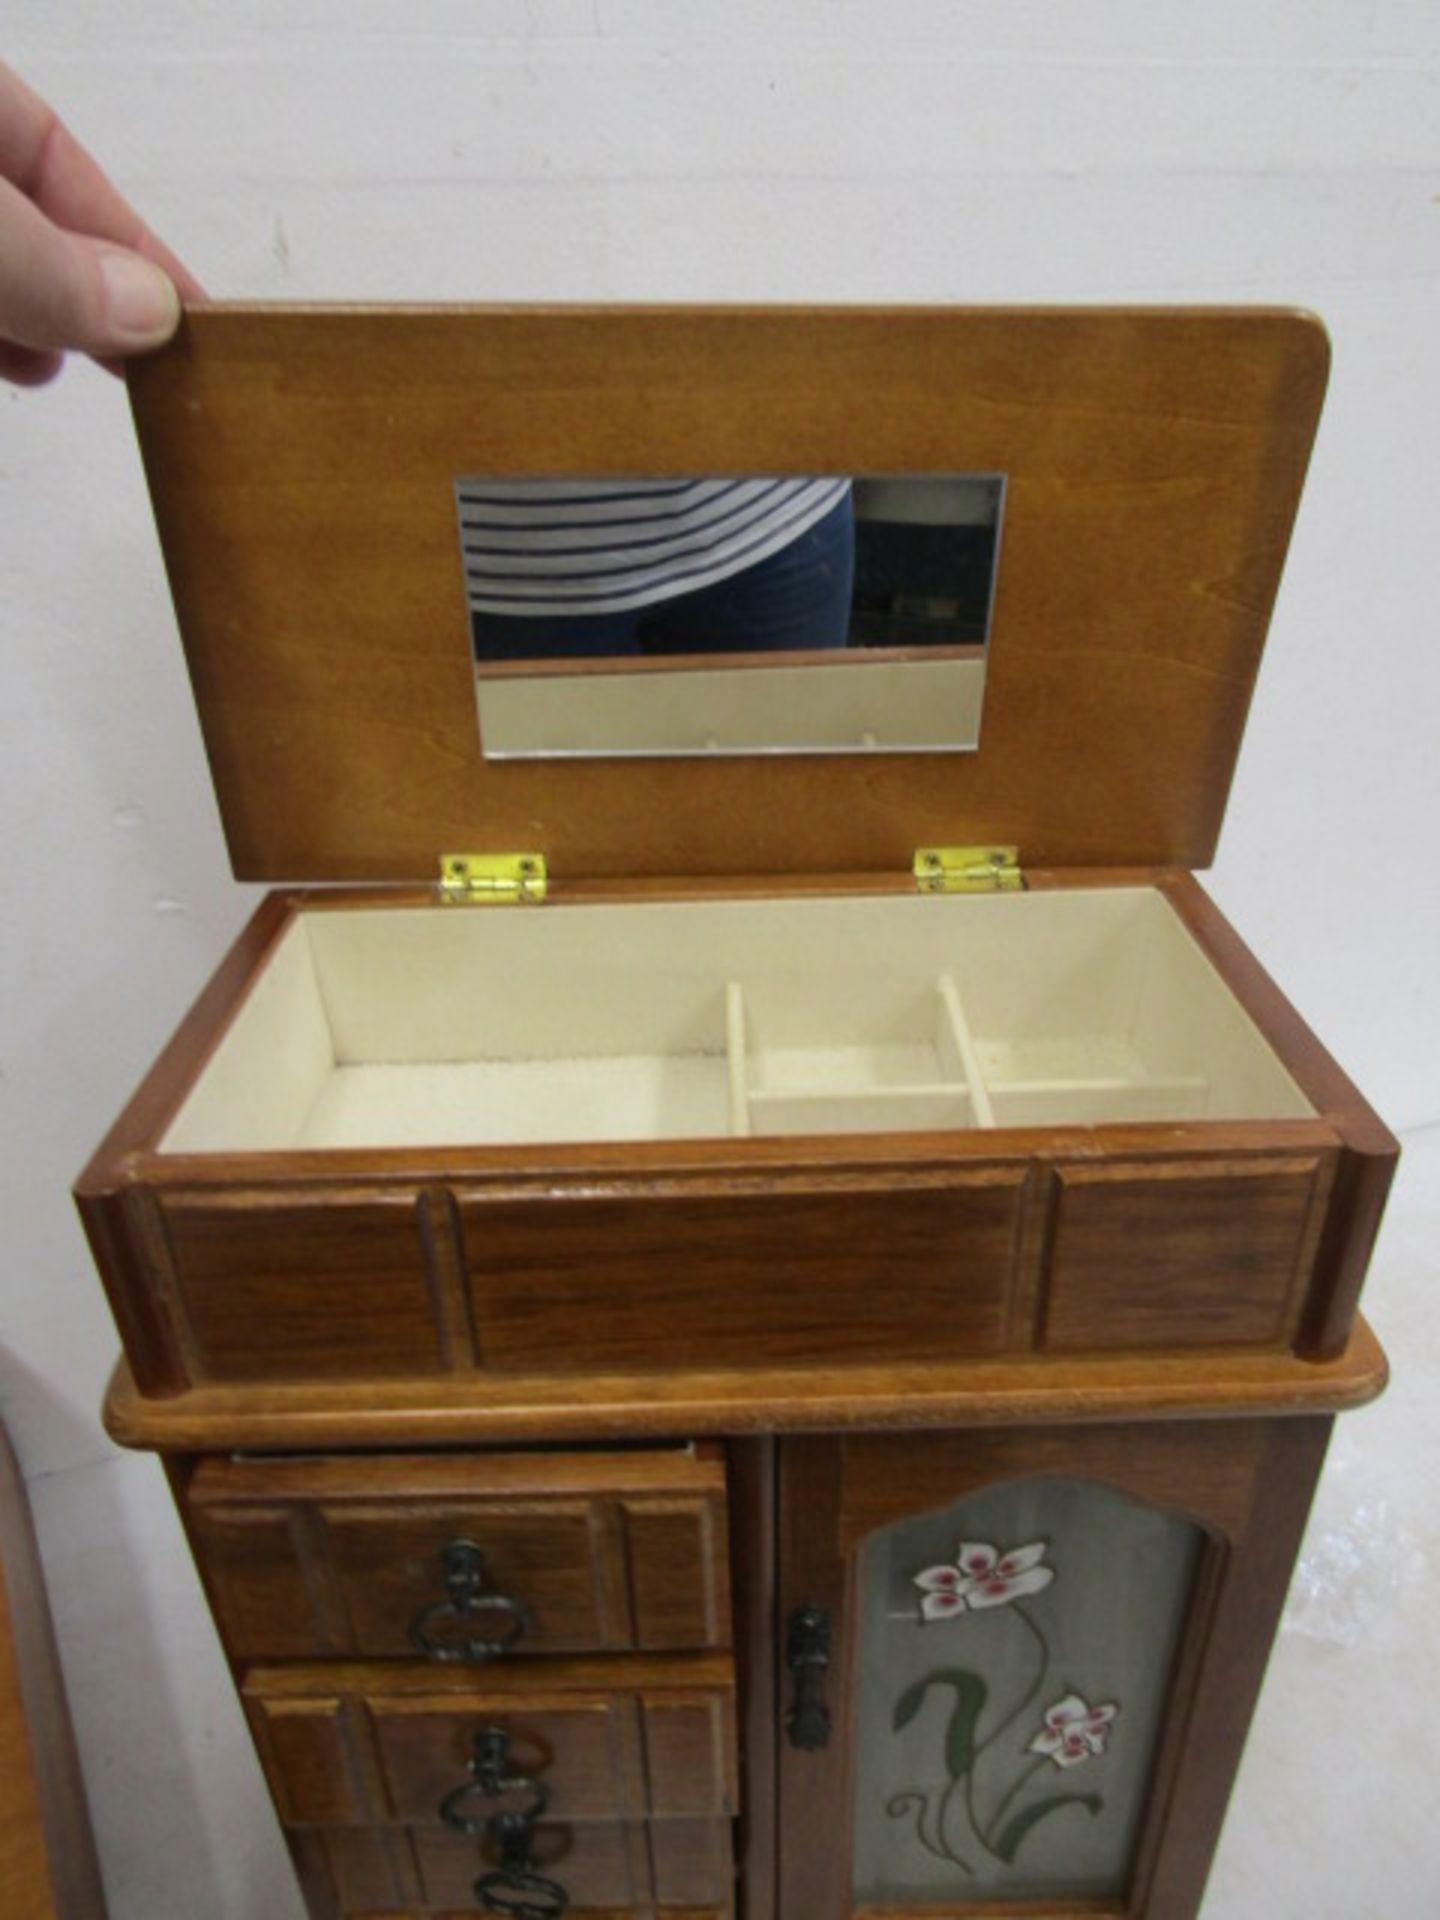 A jewellery box, display case and jewellery display stand - Image 3 of 6